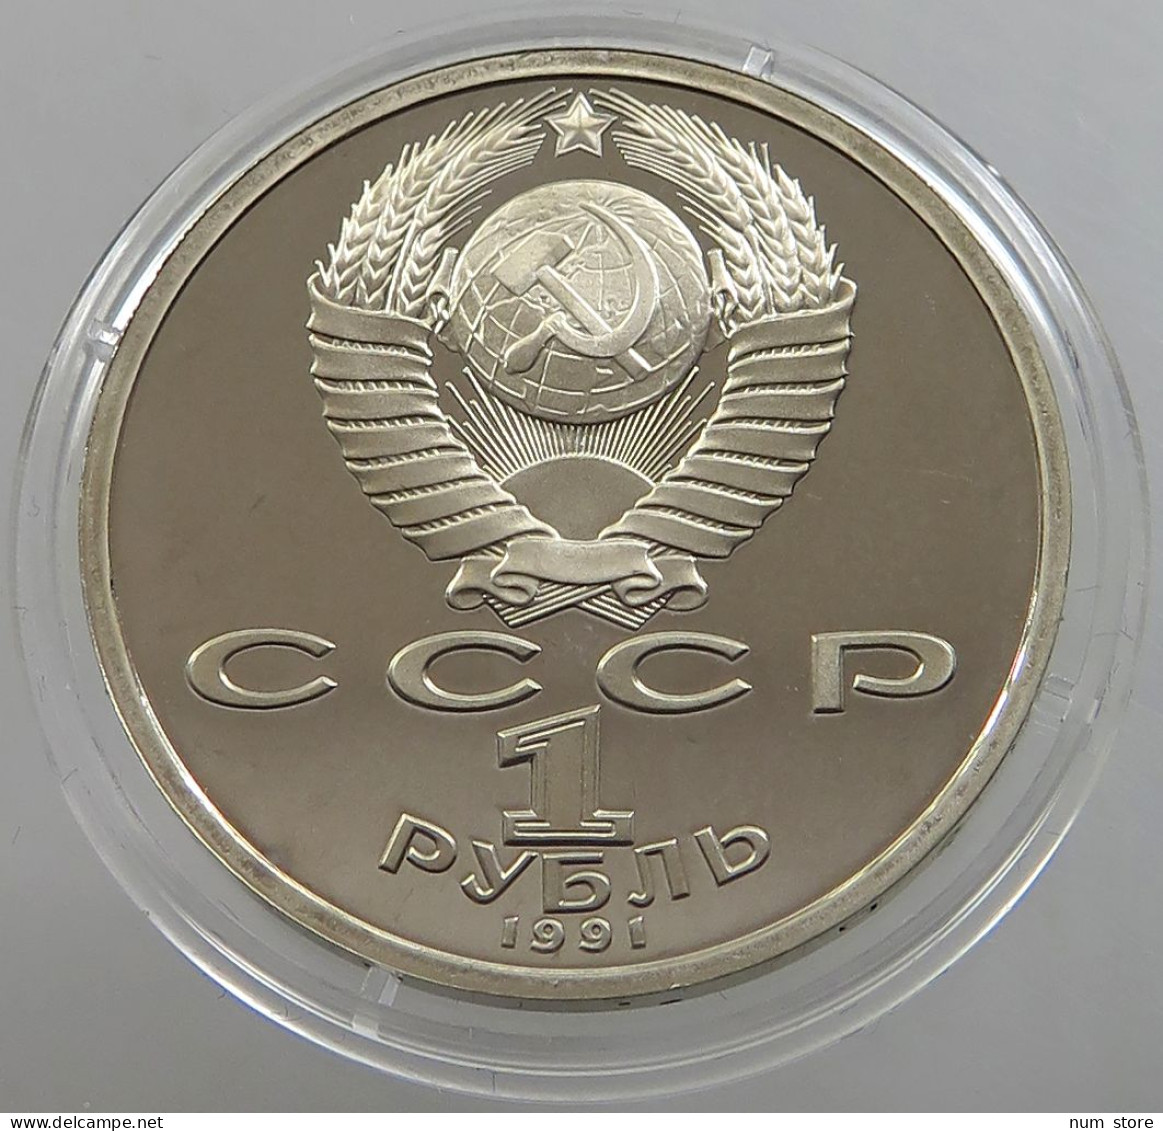 RUSSIA USSR 1 ROUBLE 1991 BARCELONA PROOF #sm14 0715 - Russia